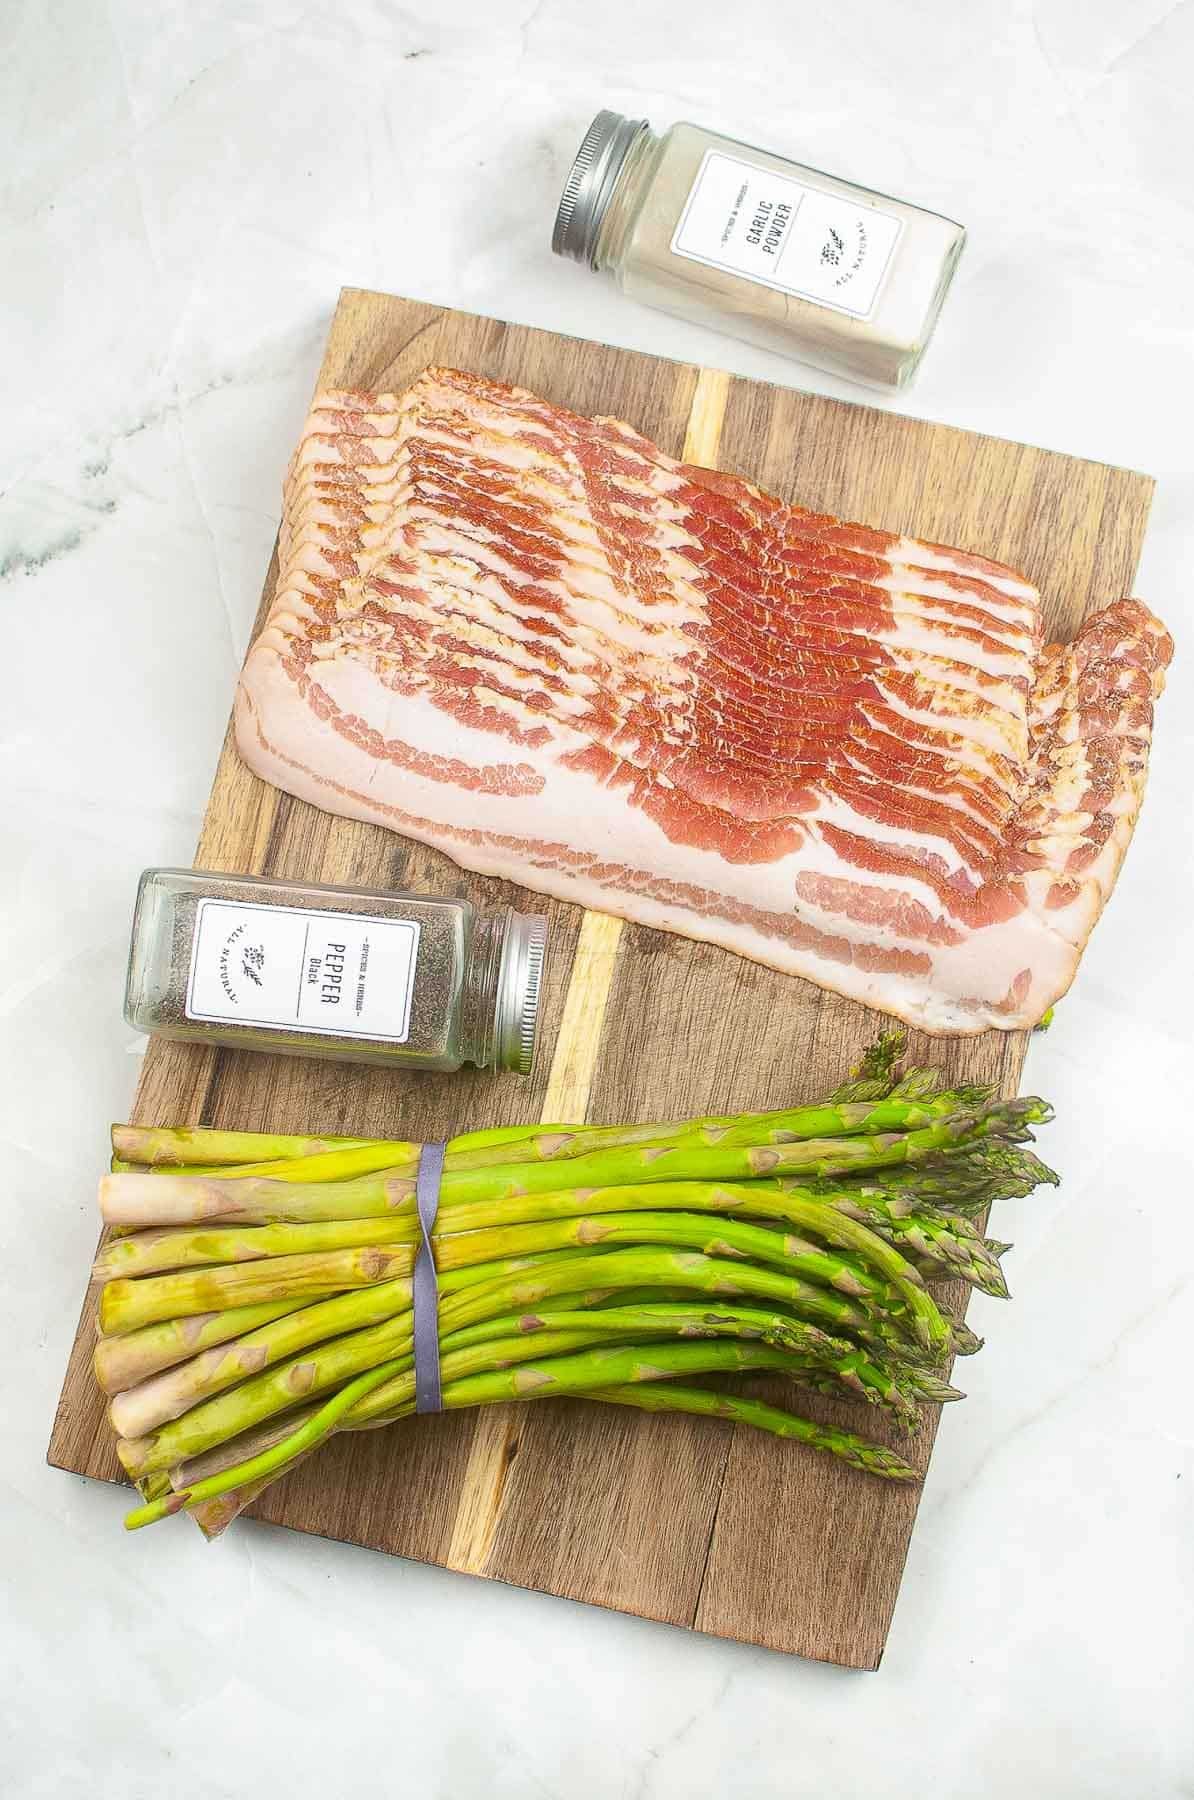 wood cutting board with one bunch of asparagus, a pound of sliced bacon and spice bottles of garlic powder and black pepper.